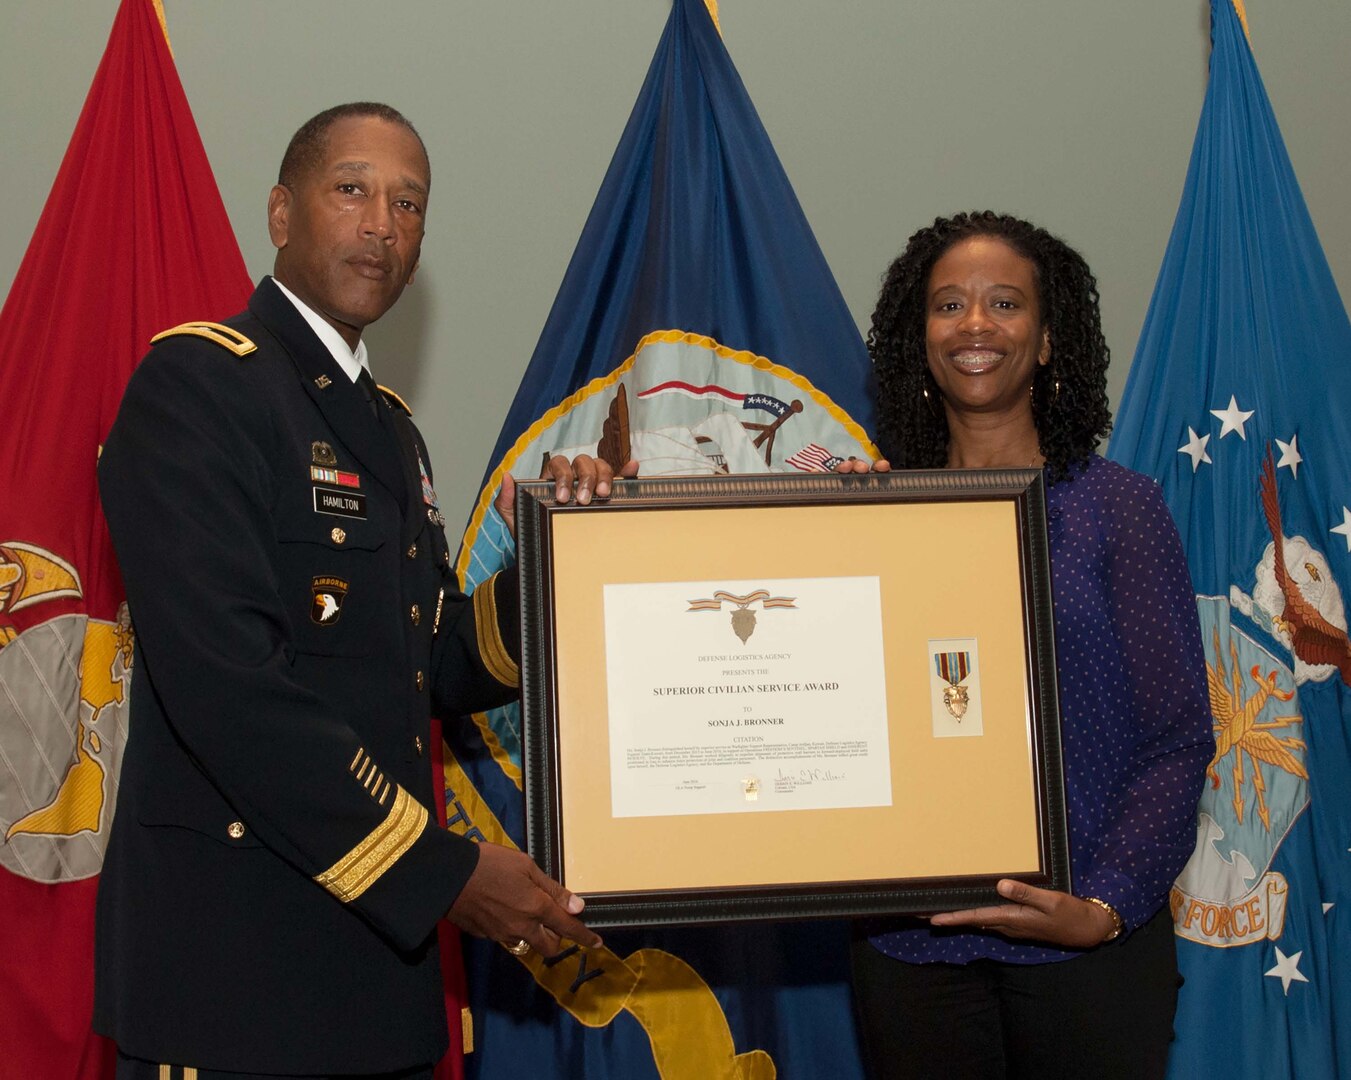 DLA Troop Support Commander Army Brig. Gen. Charles Hamilton, left, presents tailored vendor logistics specialist Sonja Bronner, right, with a Superior Civilian Service Award during a Quarterly Awards ceremony Sept. 28. Bronner earned the award for serving as a warfighter support representative for the DLA Support Team Kuwait in support of Operations Freedom Sentinel, Spartan Shield and Inherent Resolve.